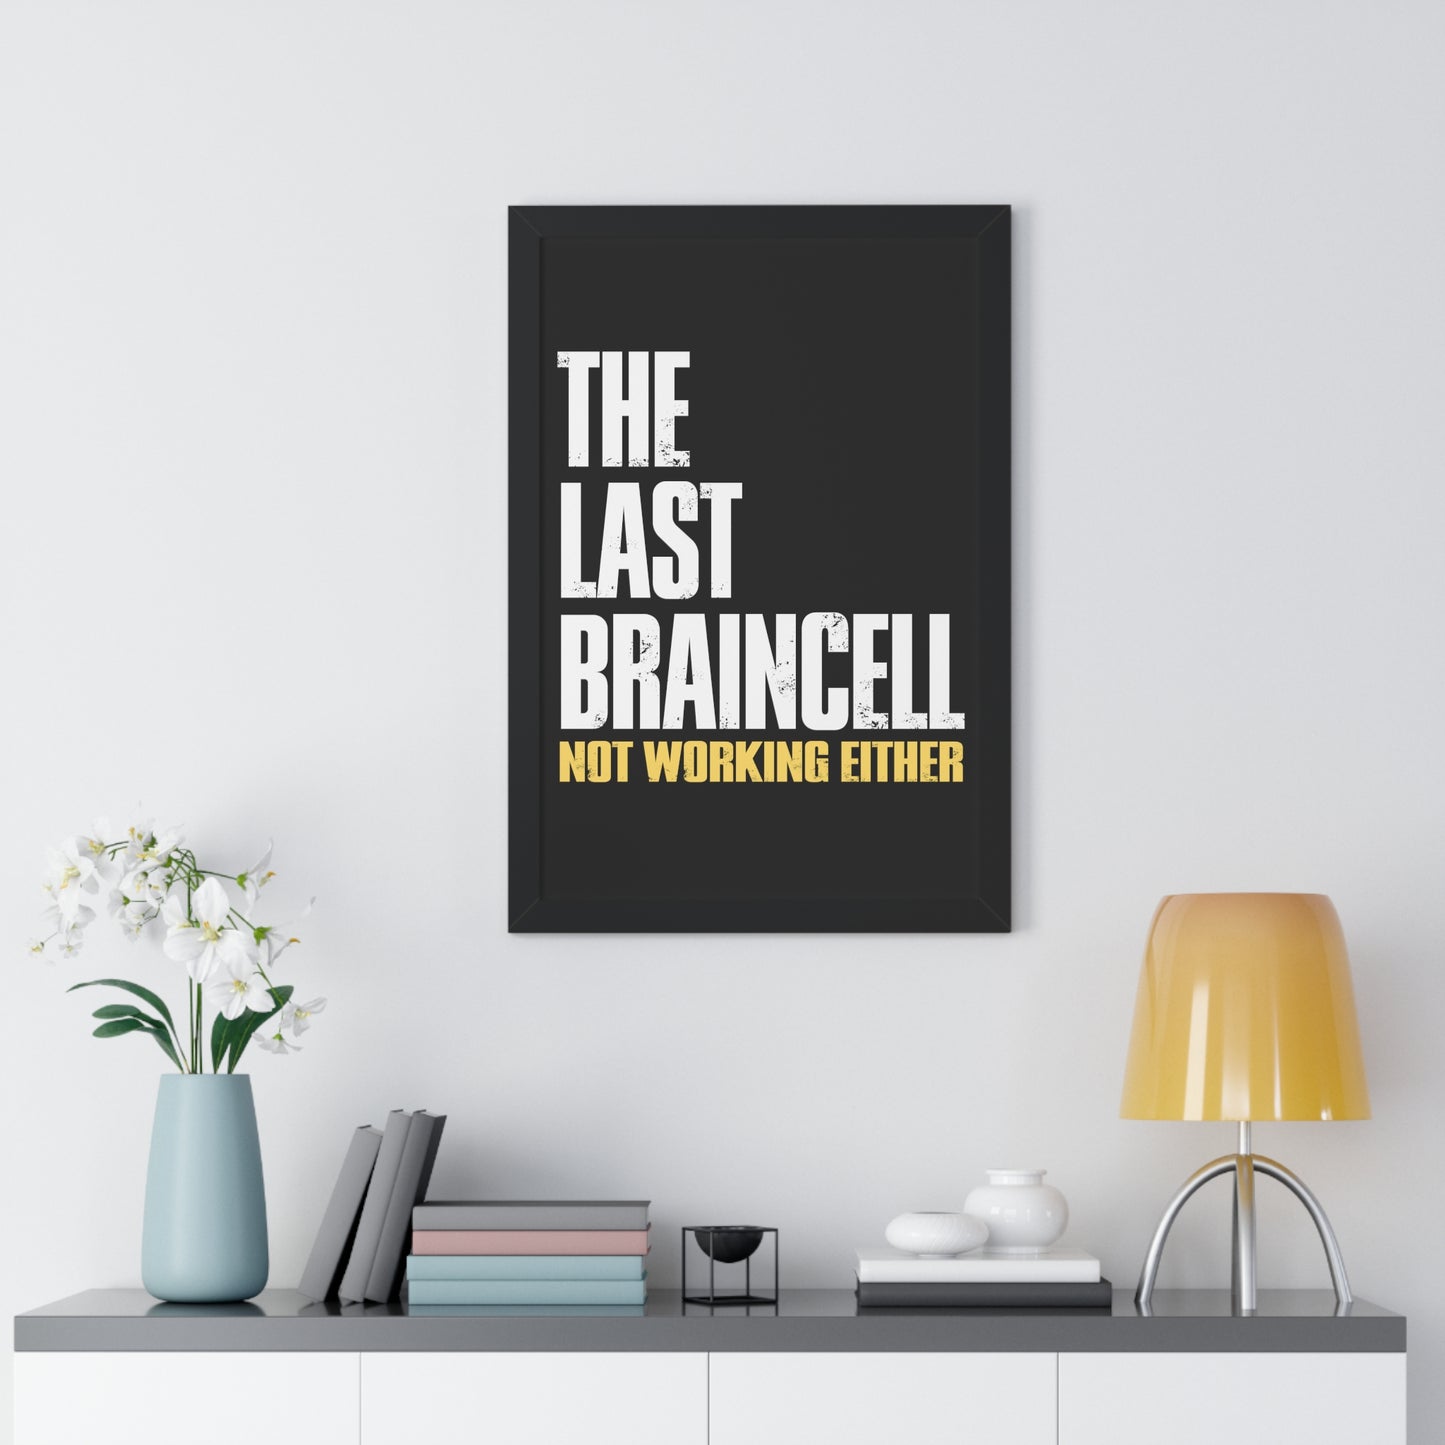 TLOU Framed Poster - The Last Braincell